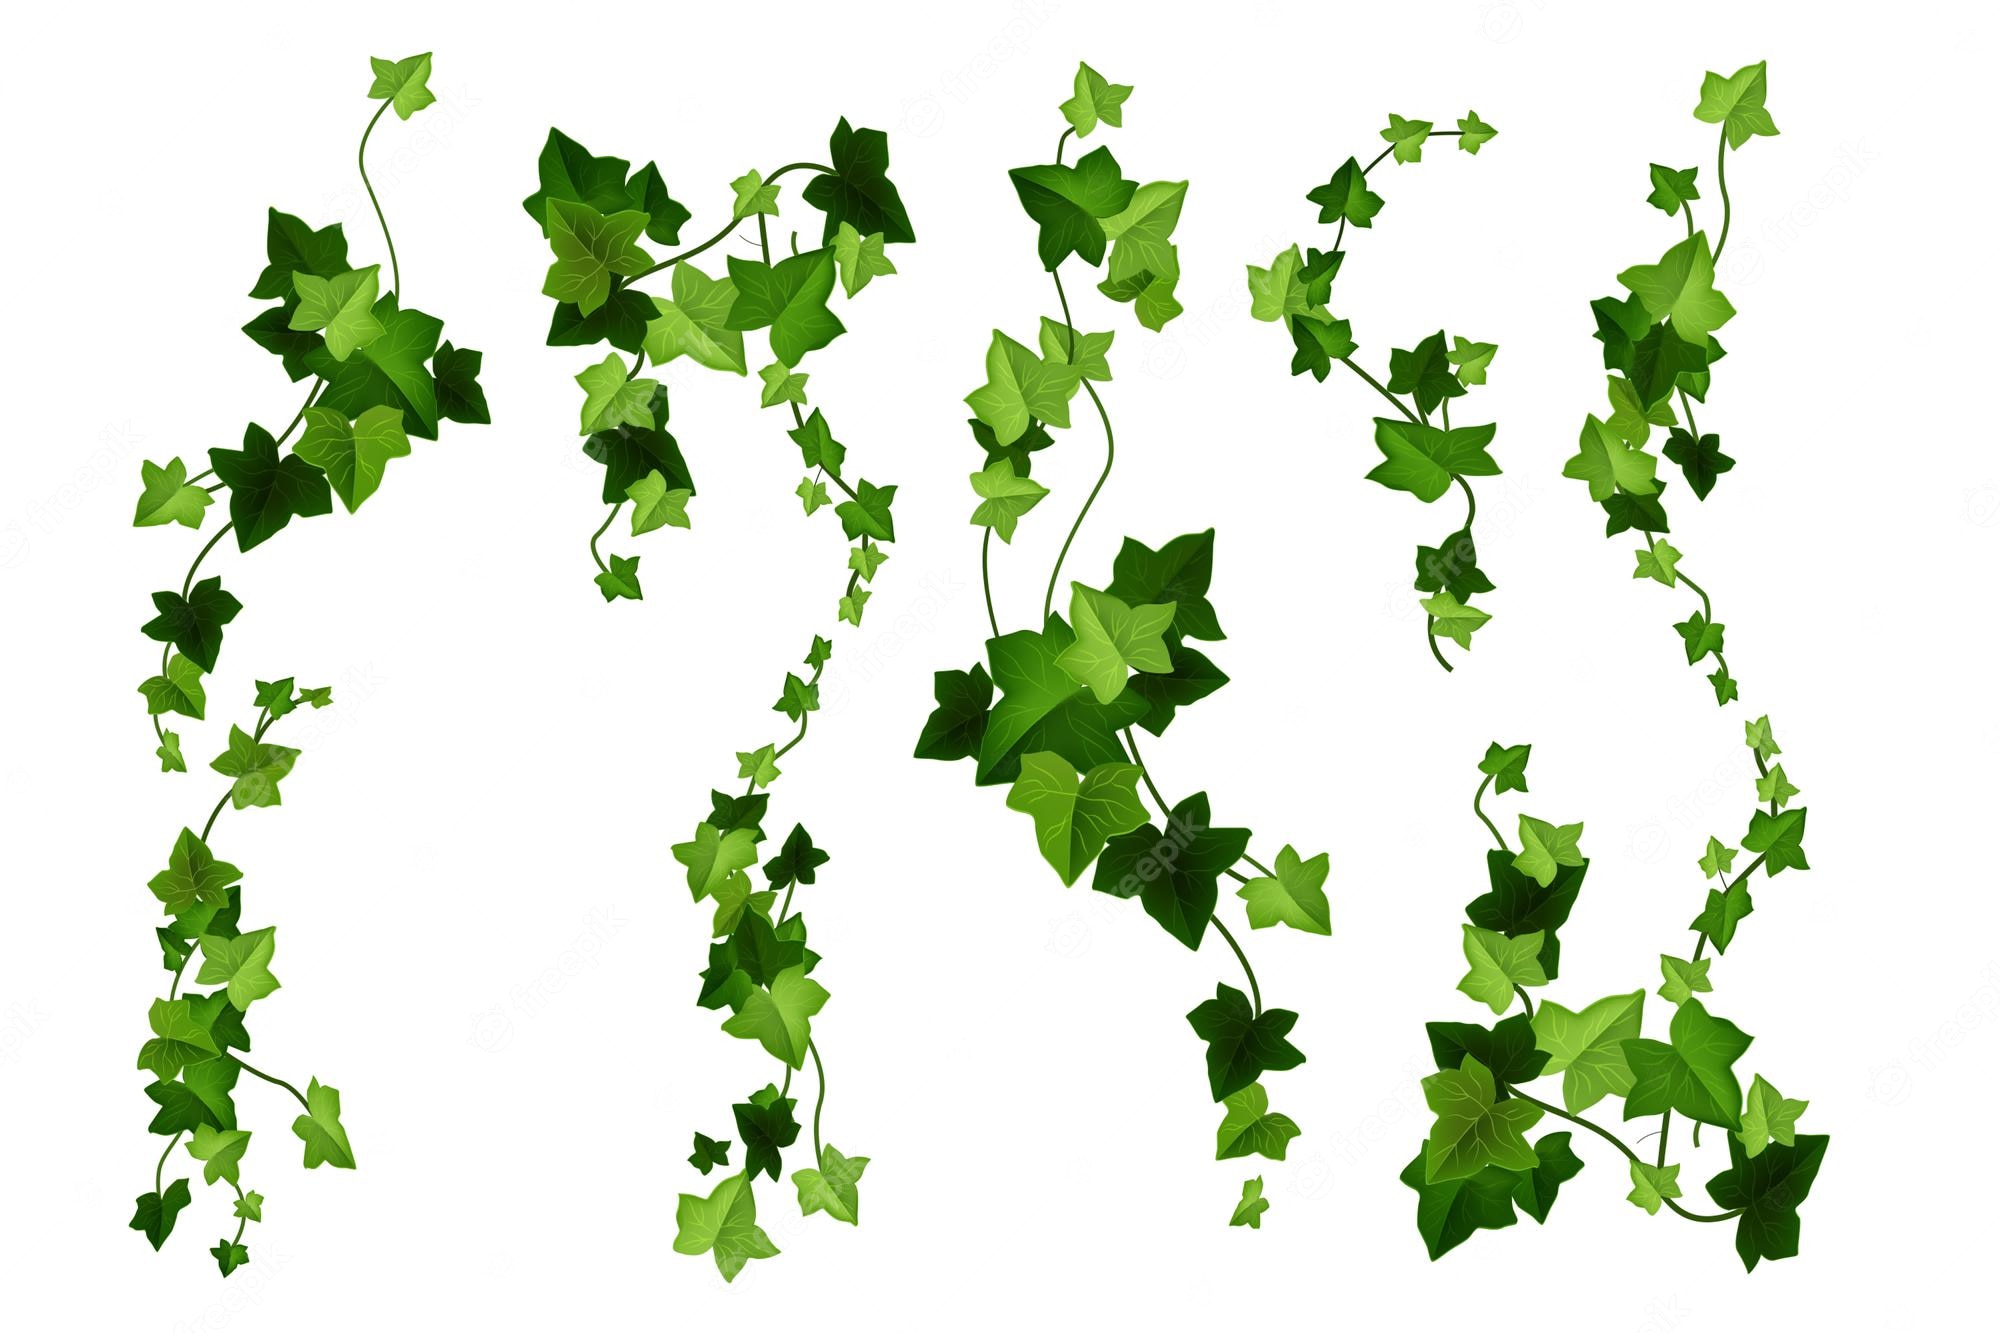 Free Clipart Of A green vine border